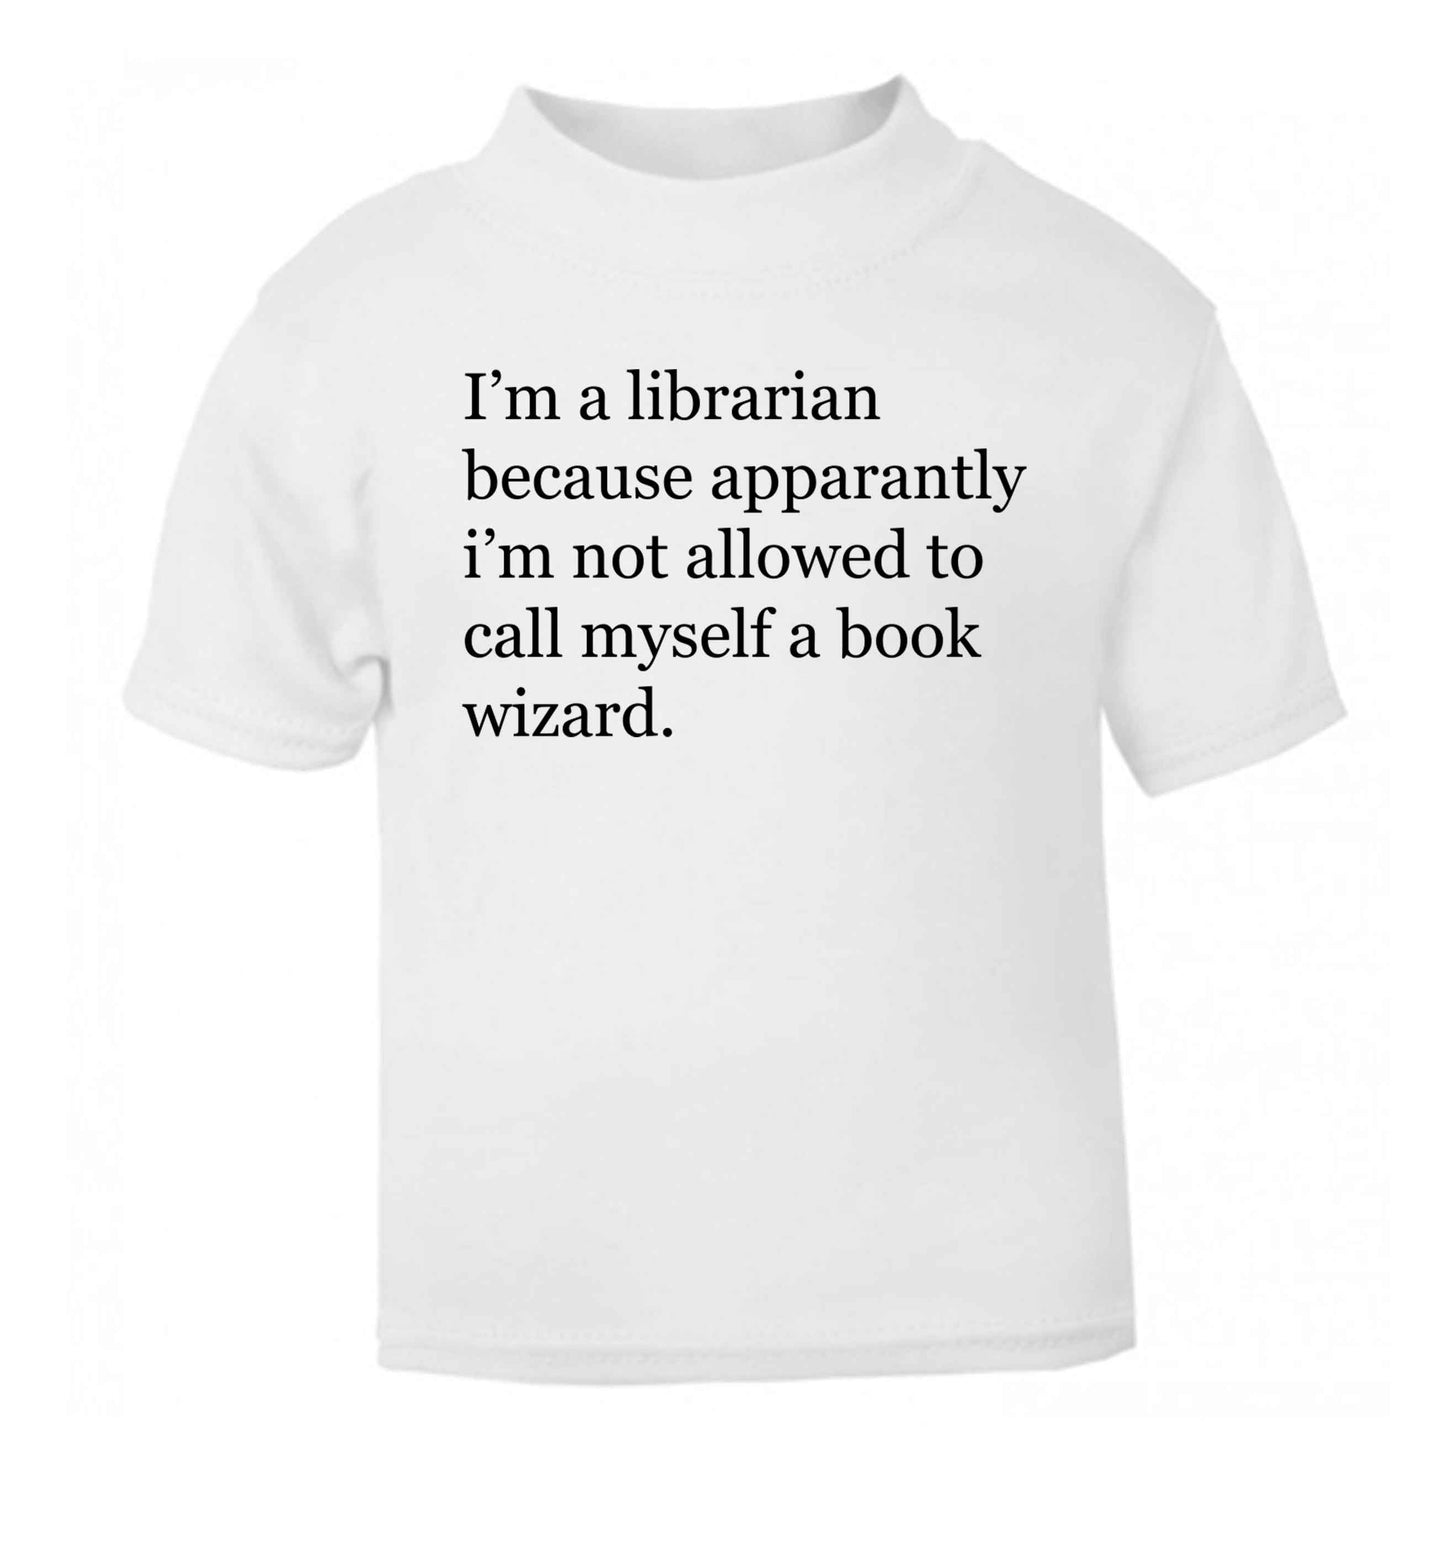 iÕm a librarian because apparantly iÕm not allowed to call myself a book wizard white Baby Toddler Tshirt 2 Years